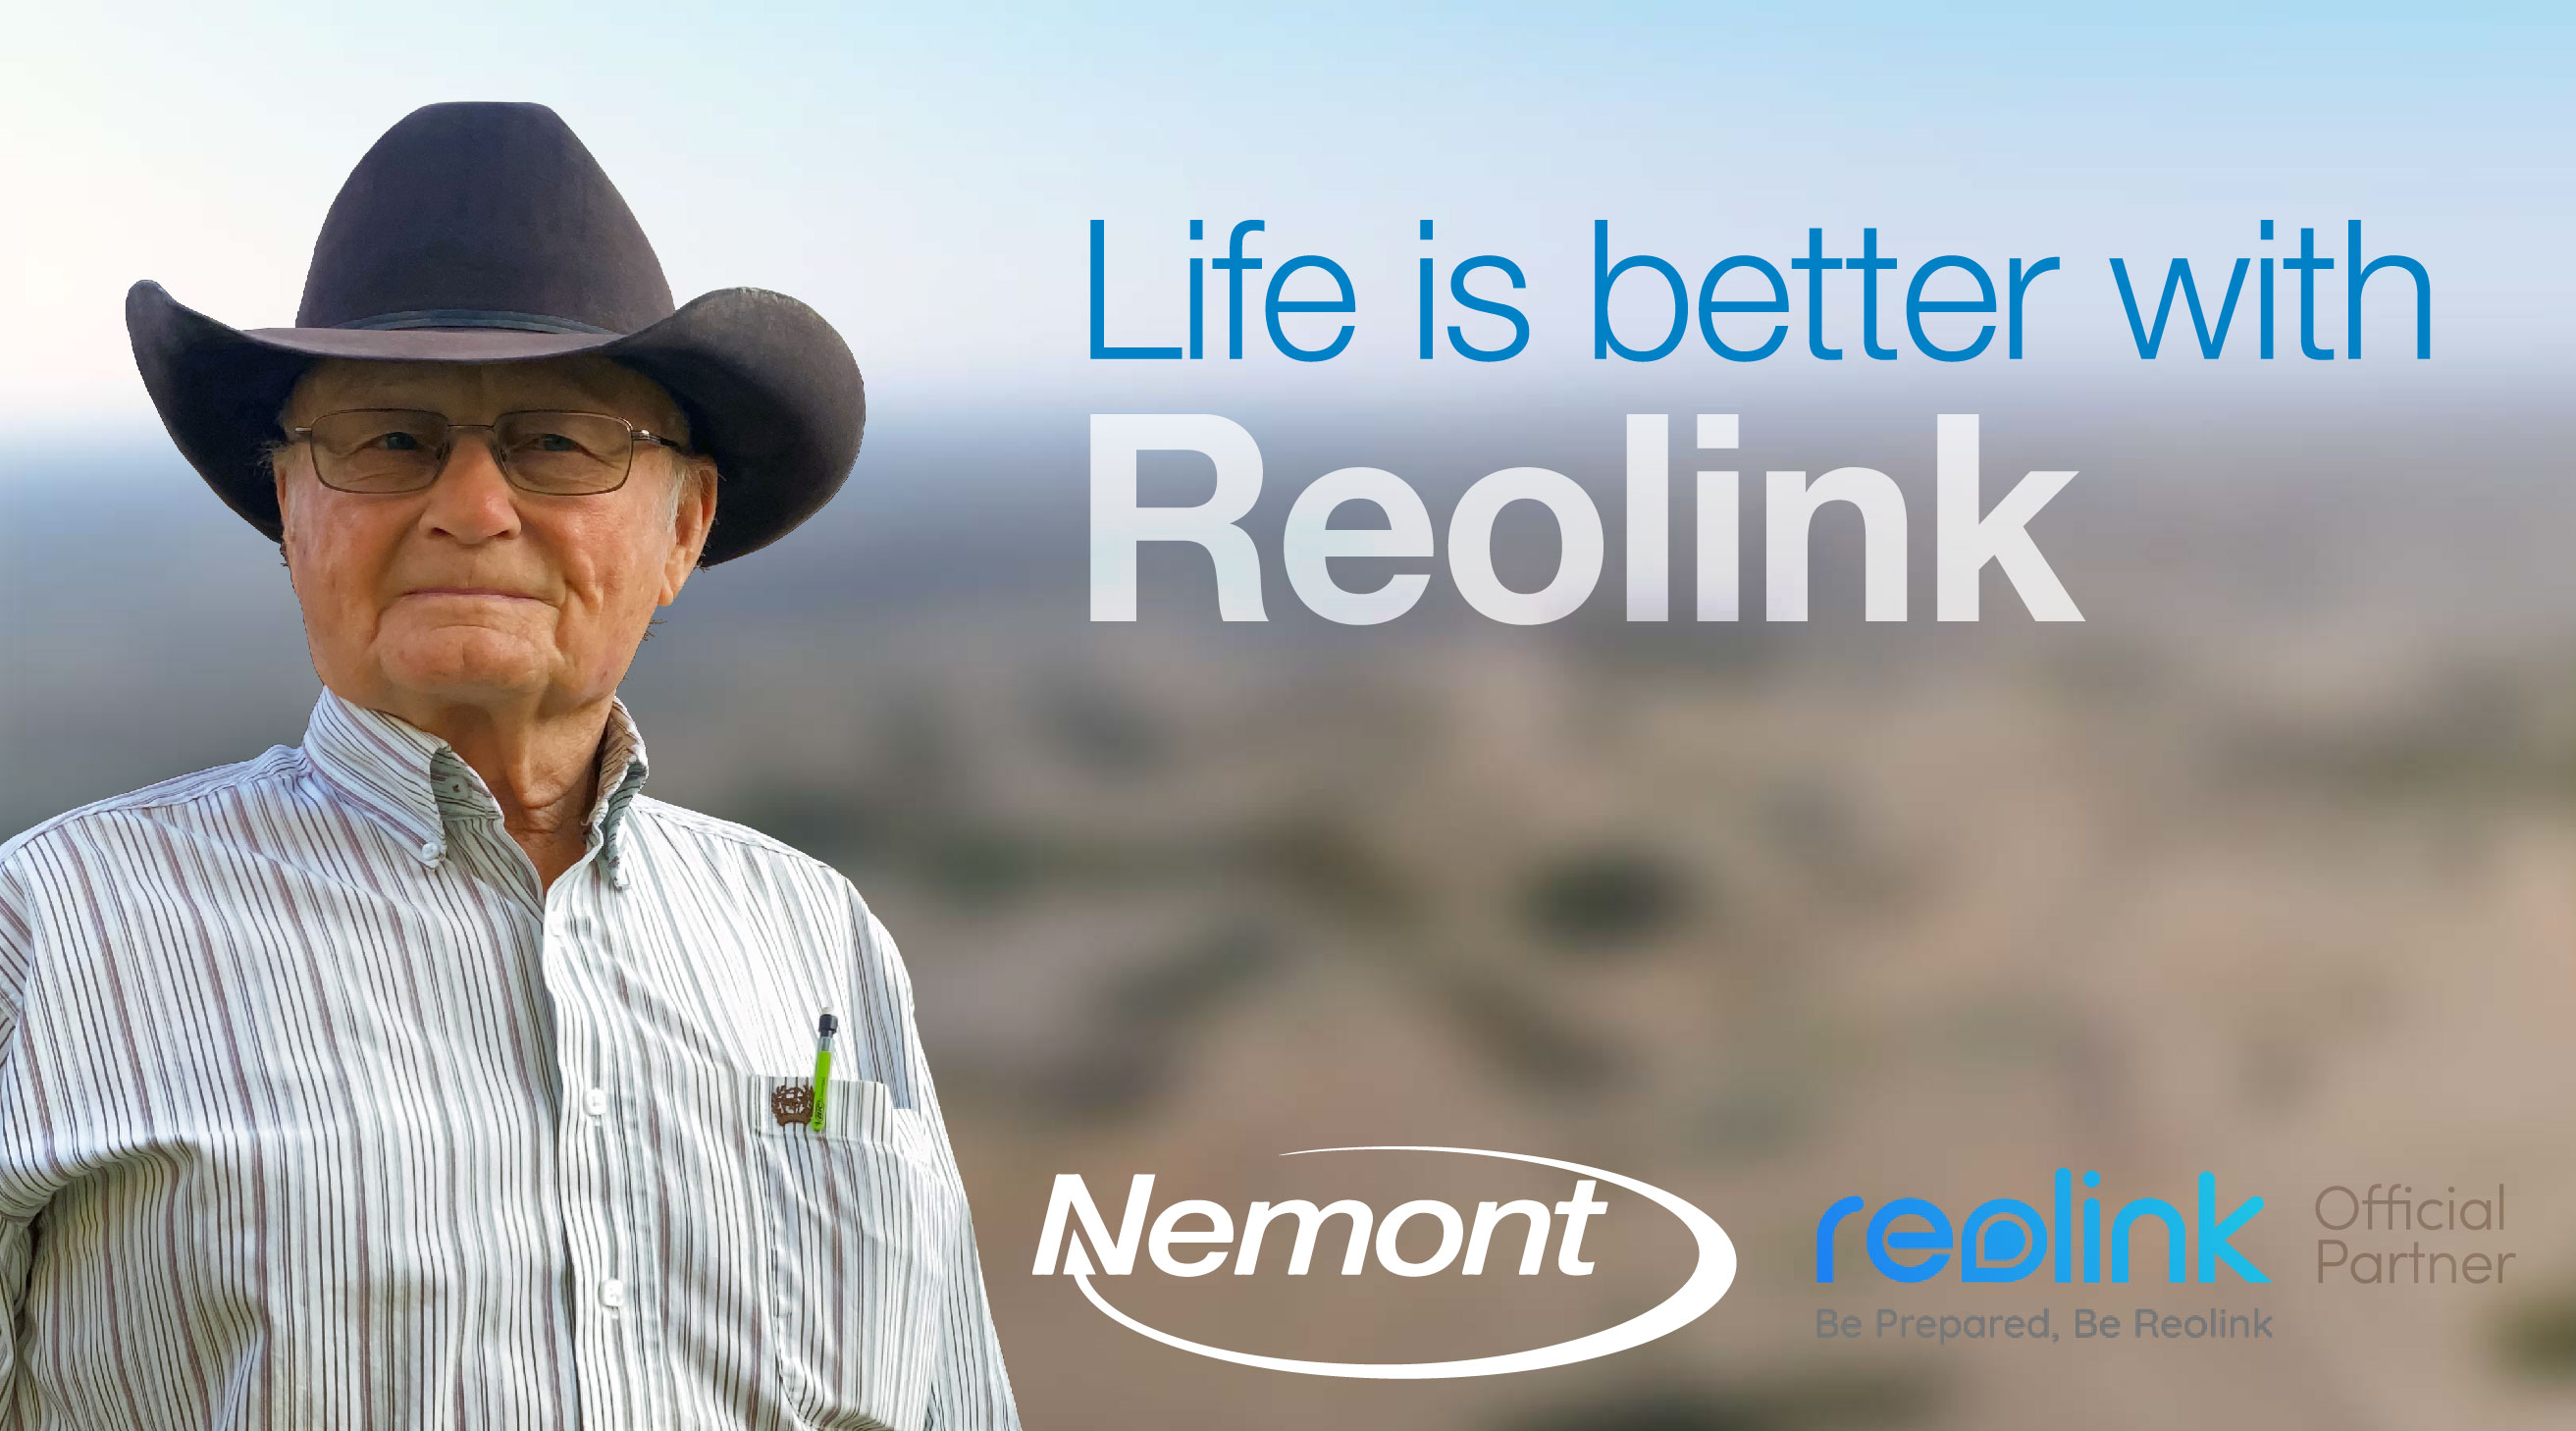 Life is better with Reolink - NTCA Video Award Winner